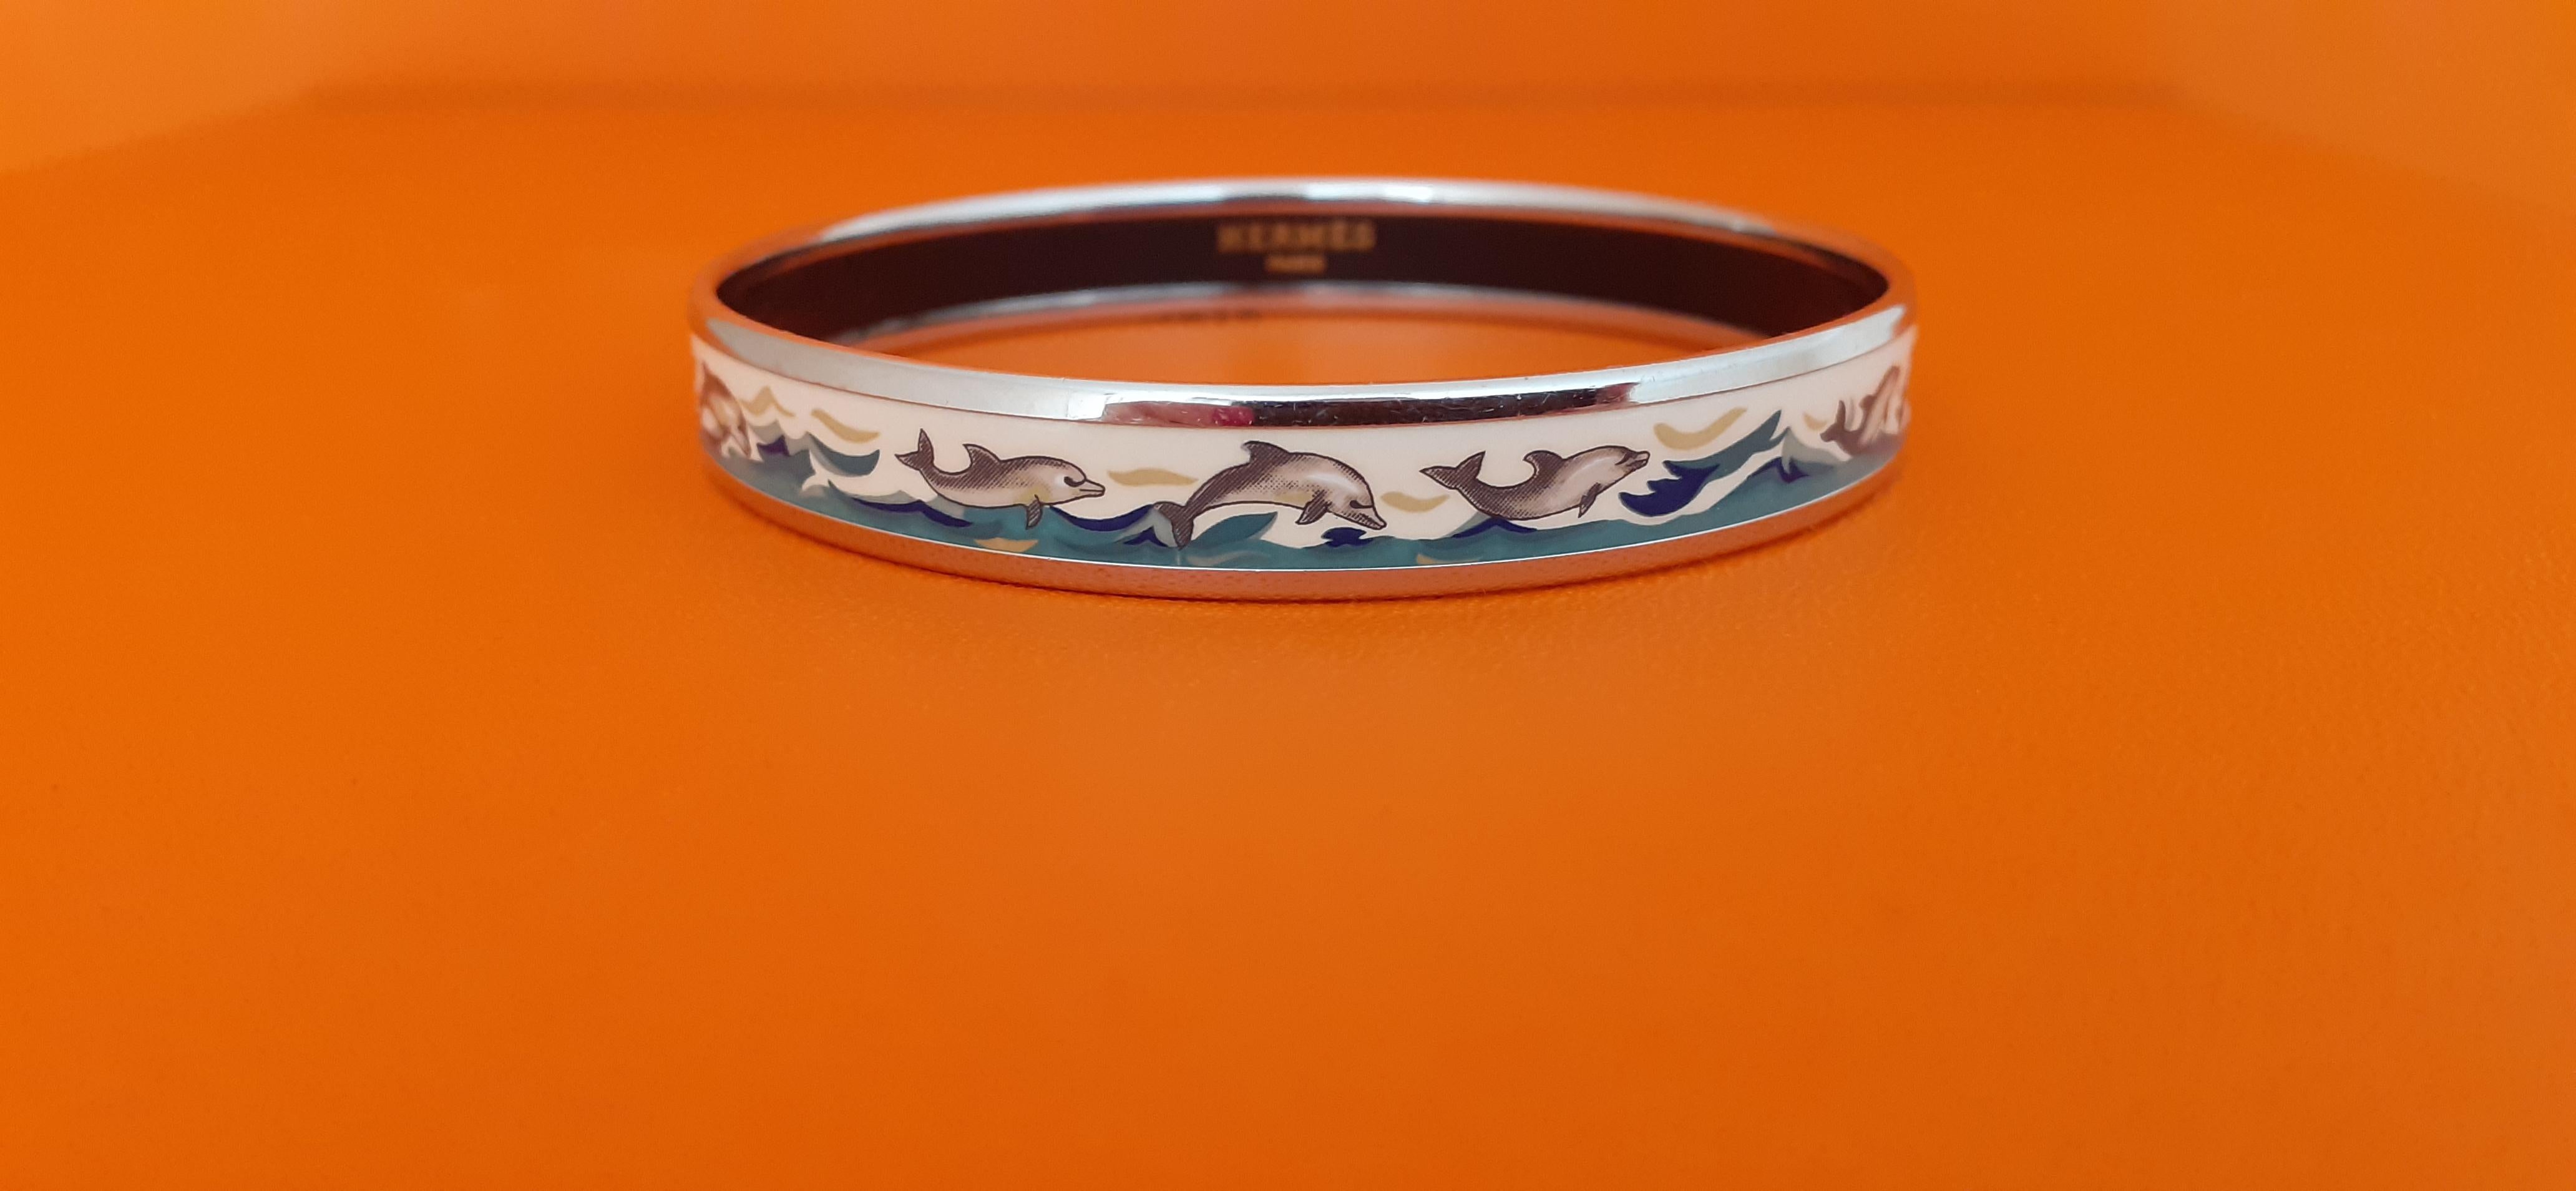 Beautiful Authentic Hermès Bracelet

Print: Dolphins in See

